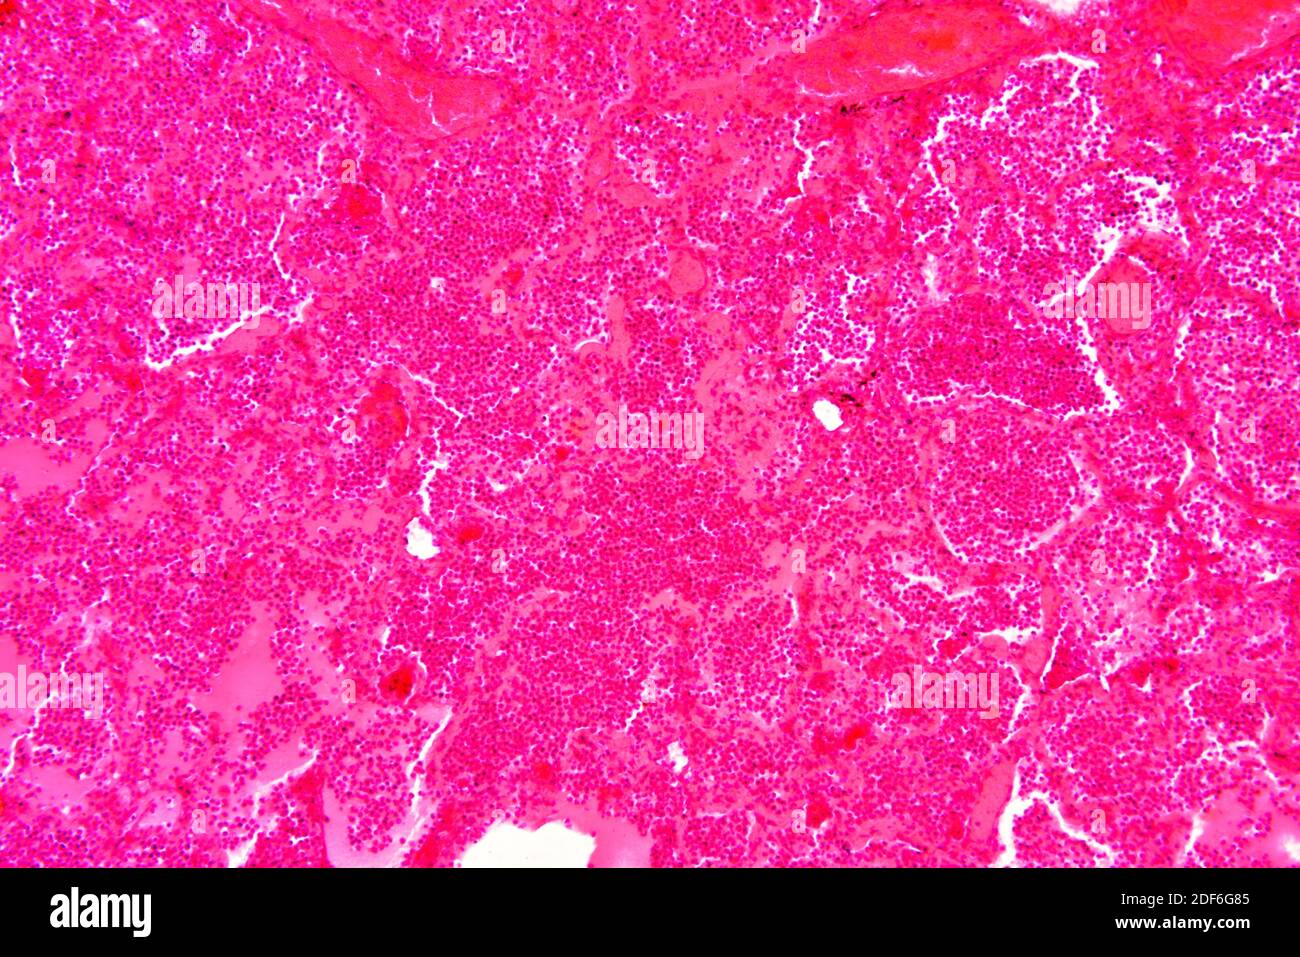 Human tuberculosis lung section. Optical microscope X100. Stock Photo